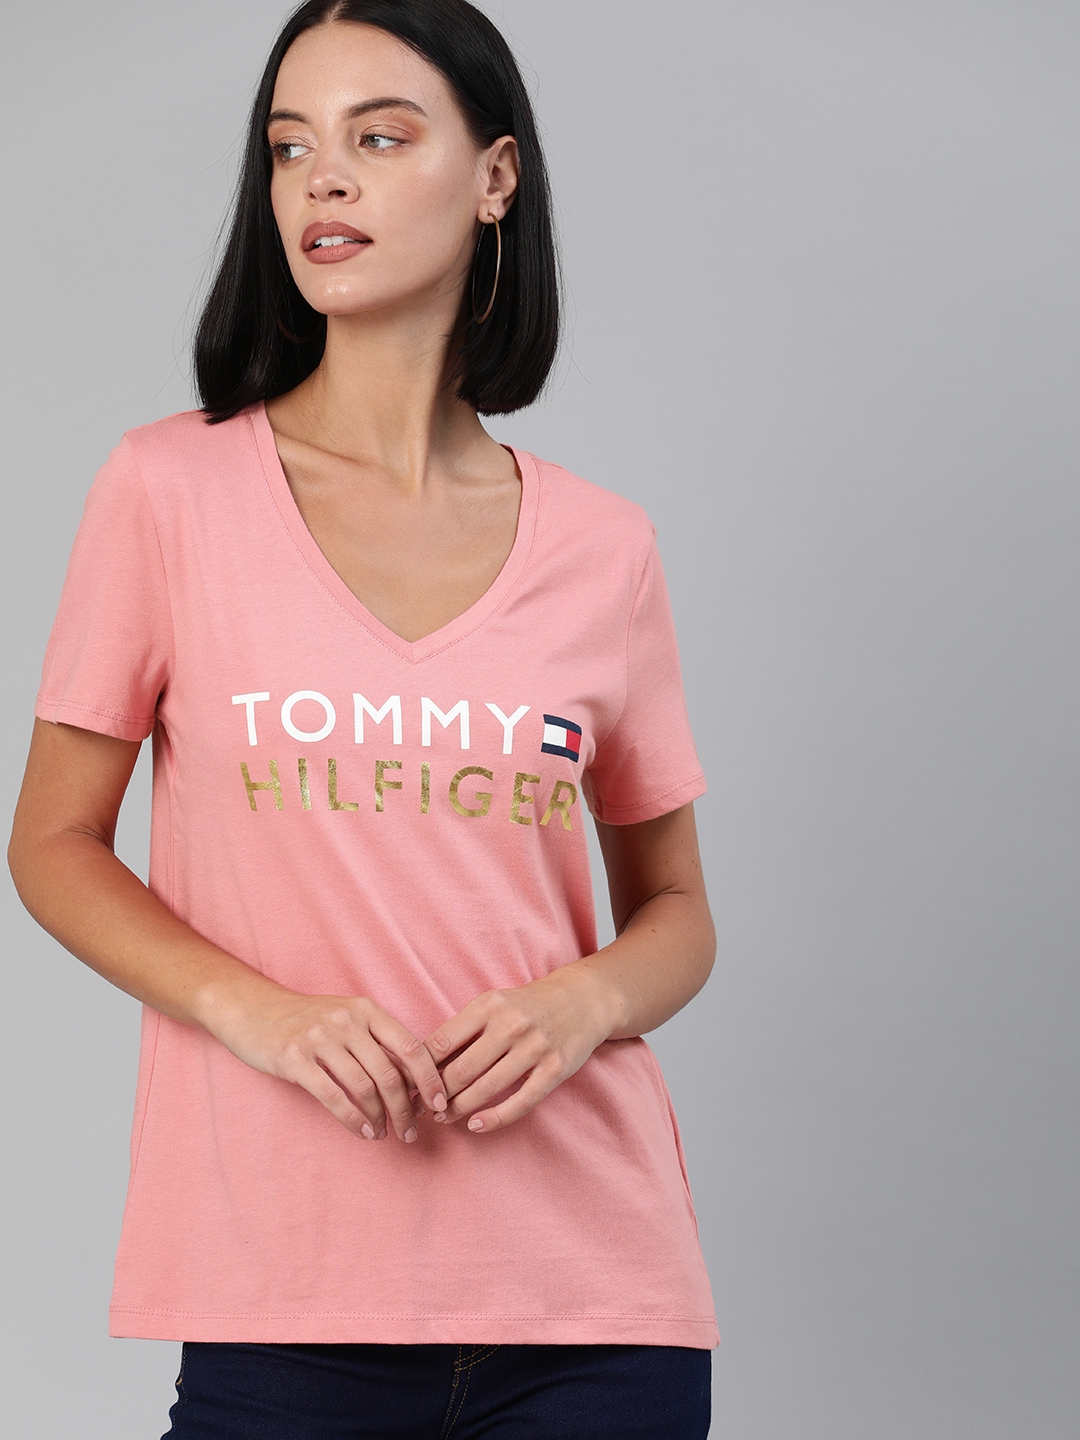 Buy Tommy Hilfiger Women Pink Printed V Neck Pure Cotton T Shirt Tshirts For Women 11925994